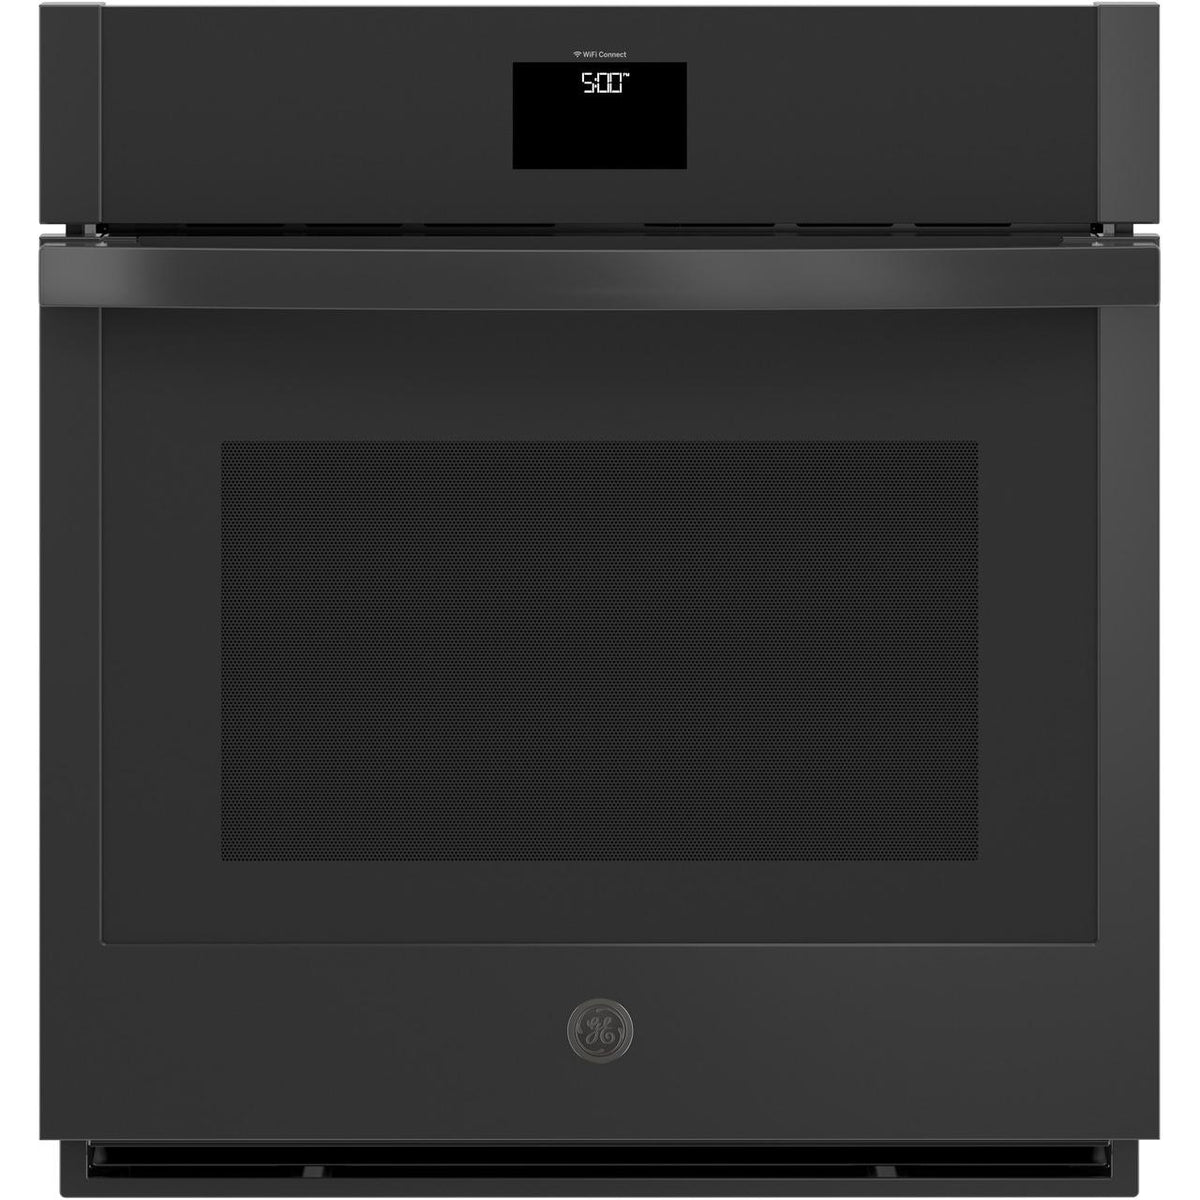 27-inch, 4.3 cu. ft. Built-in Single Wall Oven with True European Convection JKS5000DVBB IMAGE 1